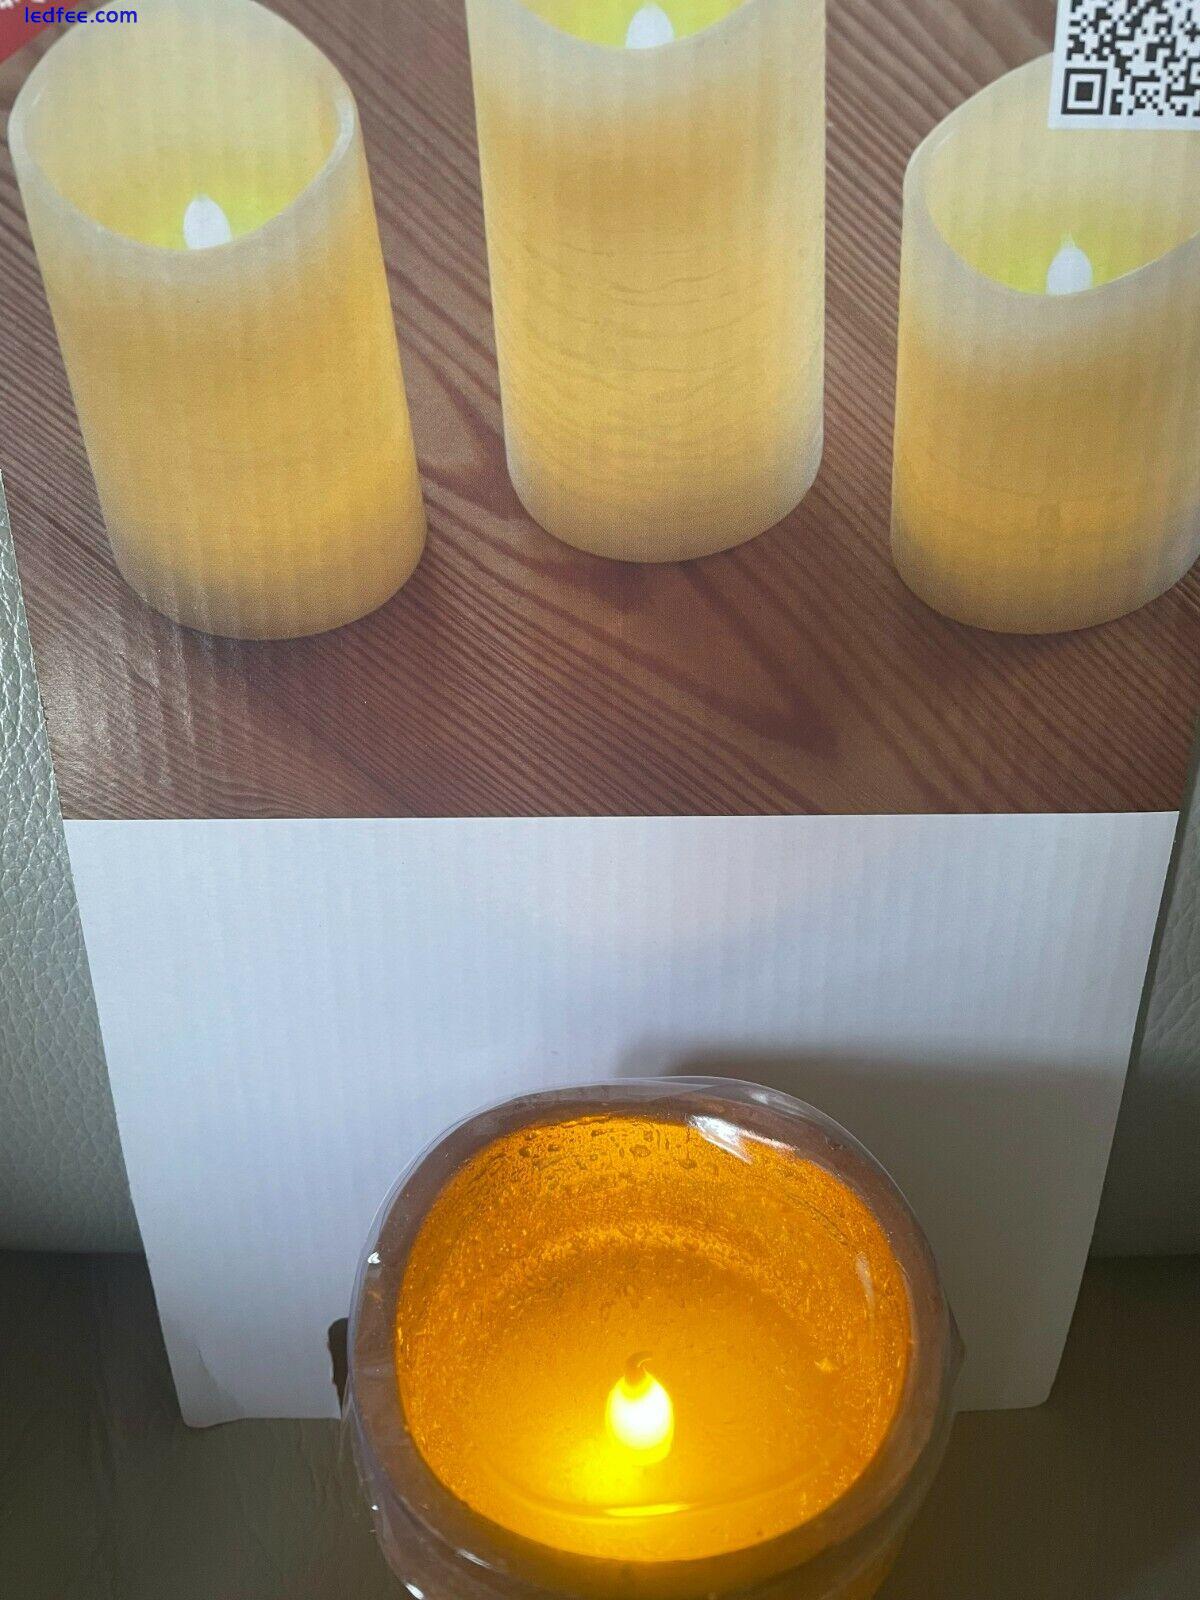 8x Battery Operated Flickering LED Candles Flameless Wax Pillar Lights 10x7.5cm 1 